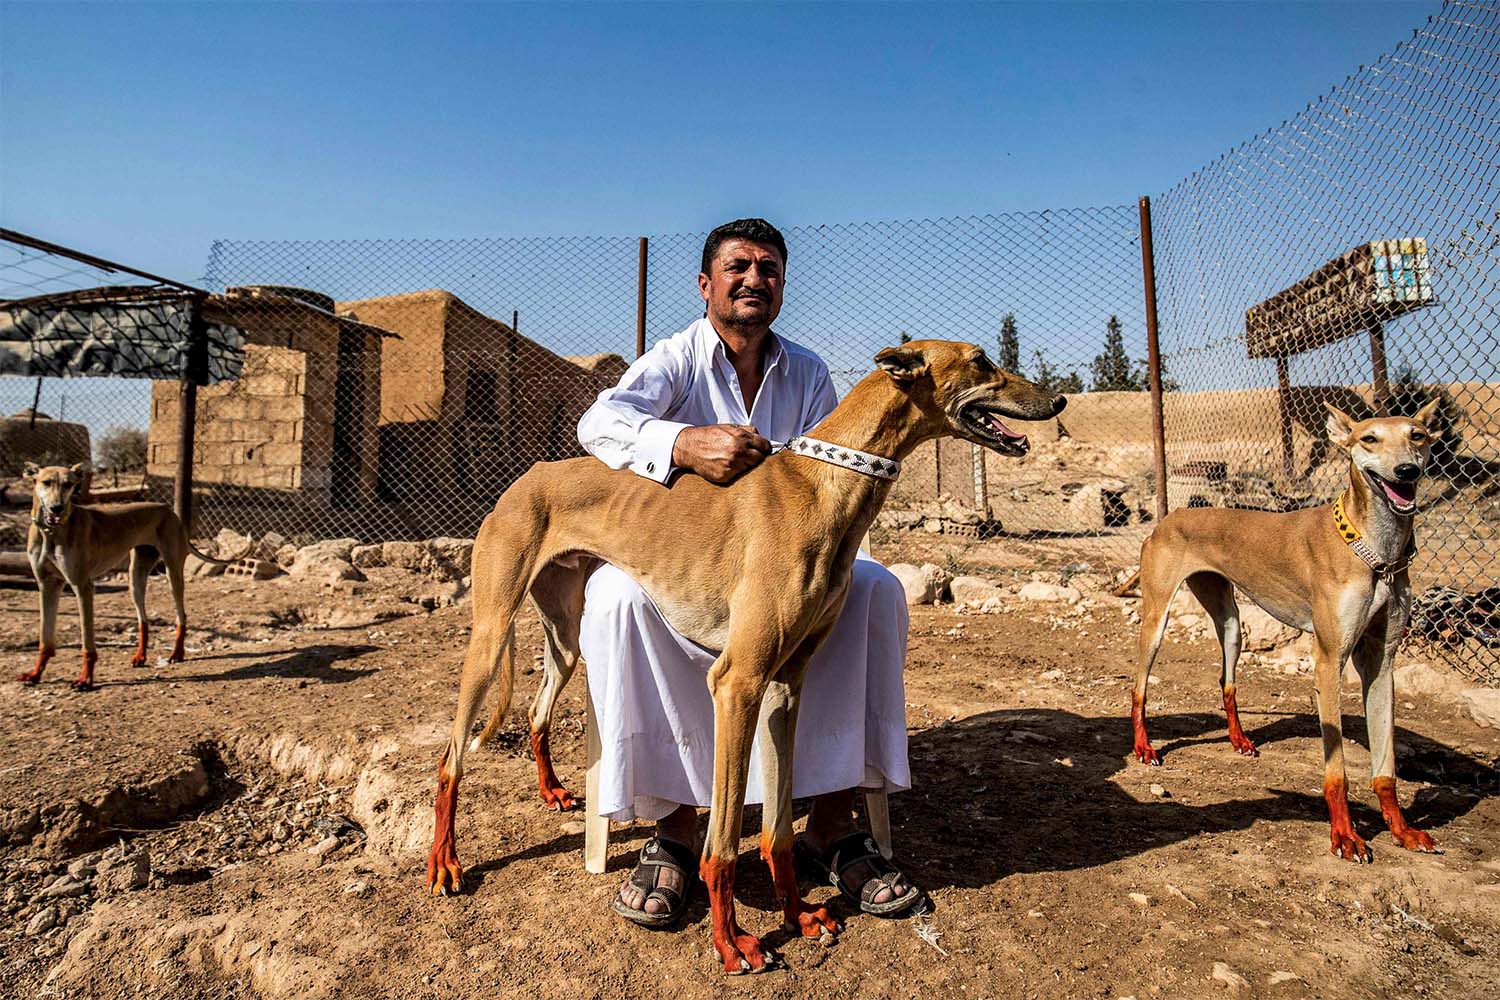 Some families in Ad-Darbasiyah started breeding Salukis in earnest around 20 years ago